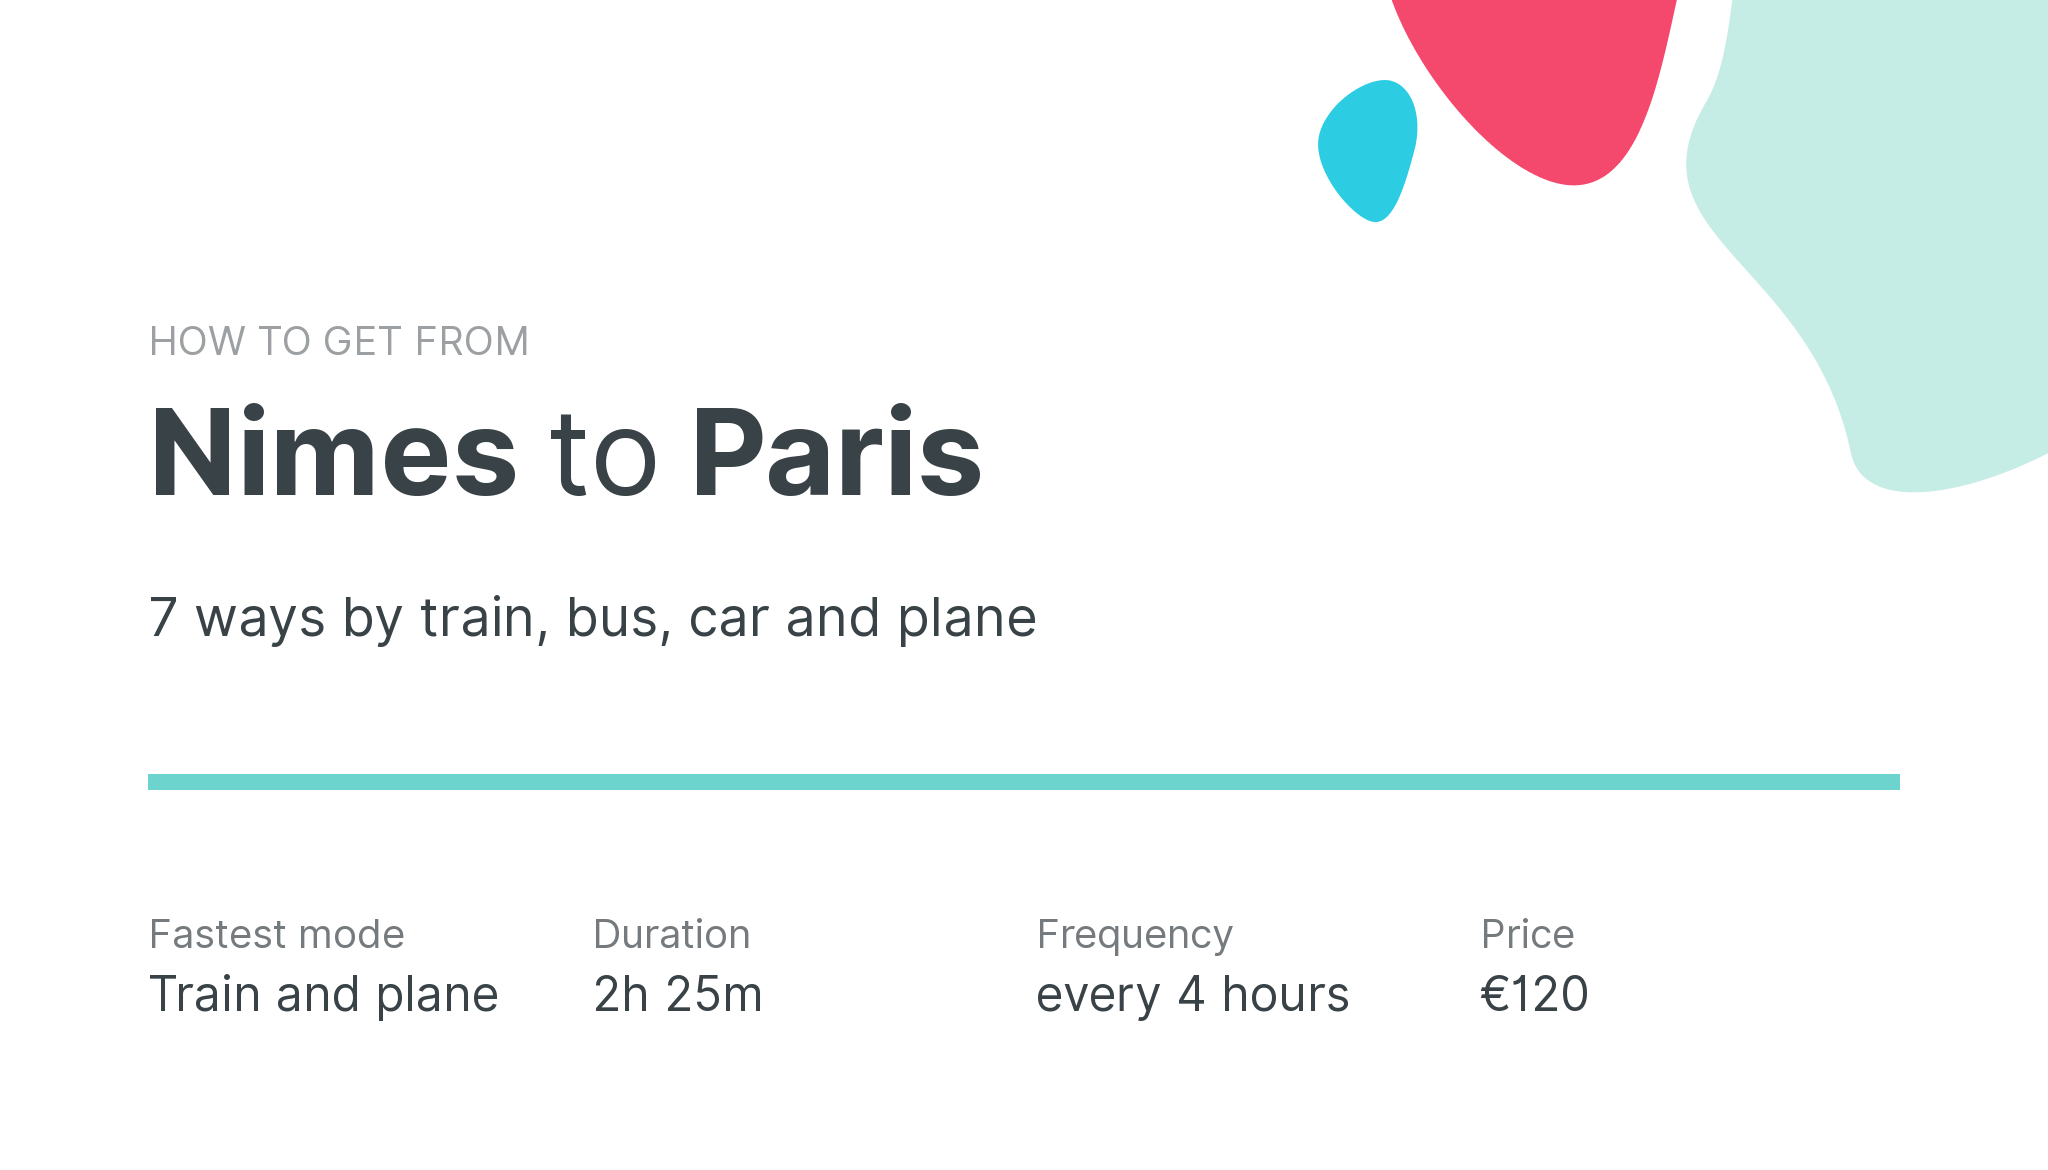 How do I get from Nimes to Paris